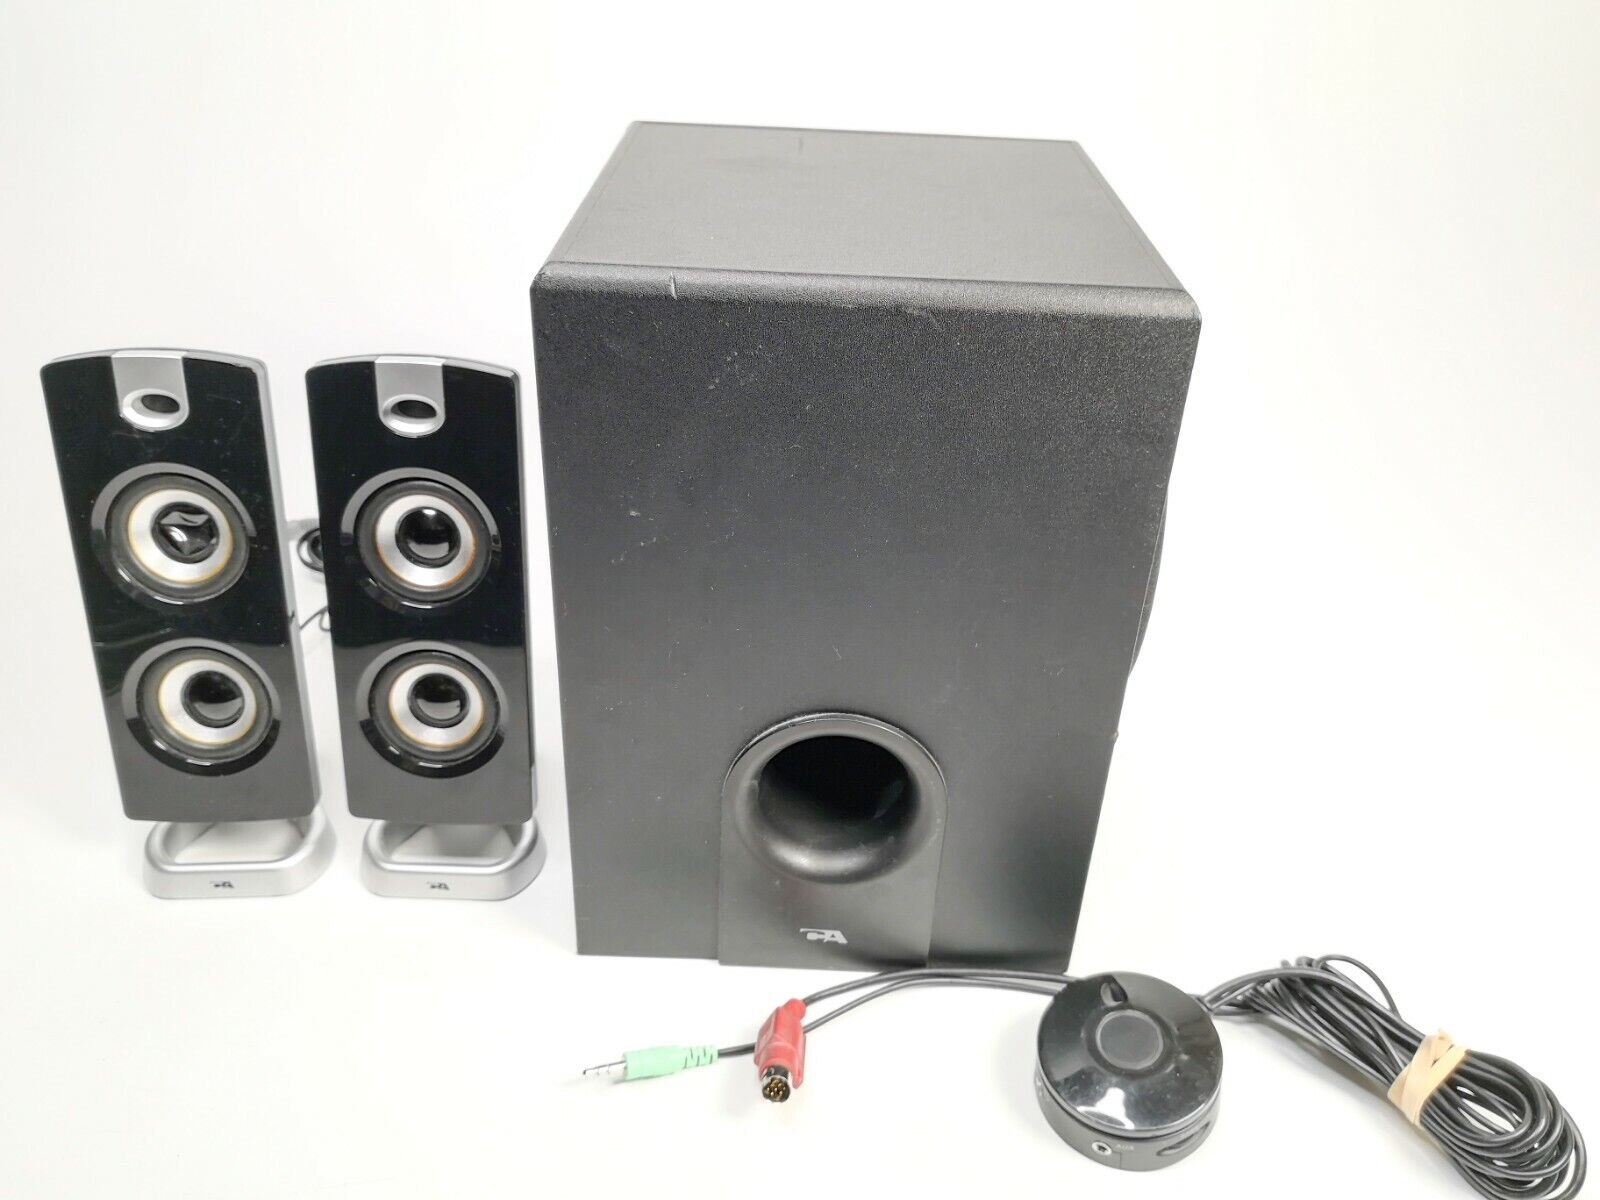 Cyber Acoustics CA-3602FFP 2.1 Speaker Sound System Speakers Sub Control Only